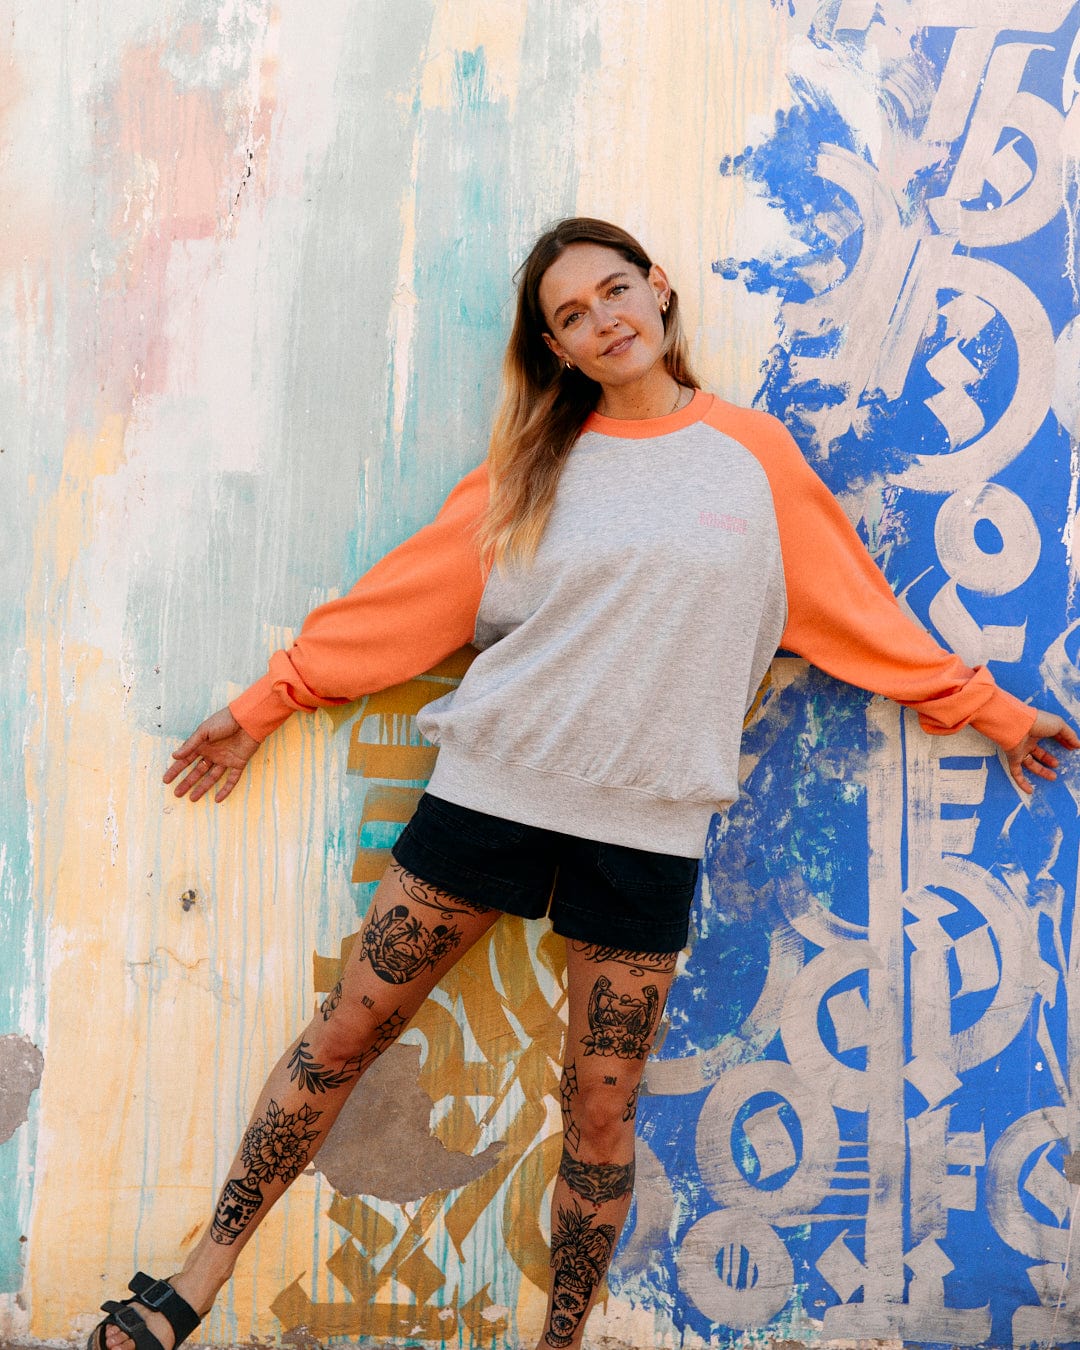 A woman with tattooed legs stands against a graffiti-covered wall, wearing a colorful Saltrock Sunshine sweatshirt with raglan sleeves and black shorts.